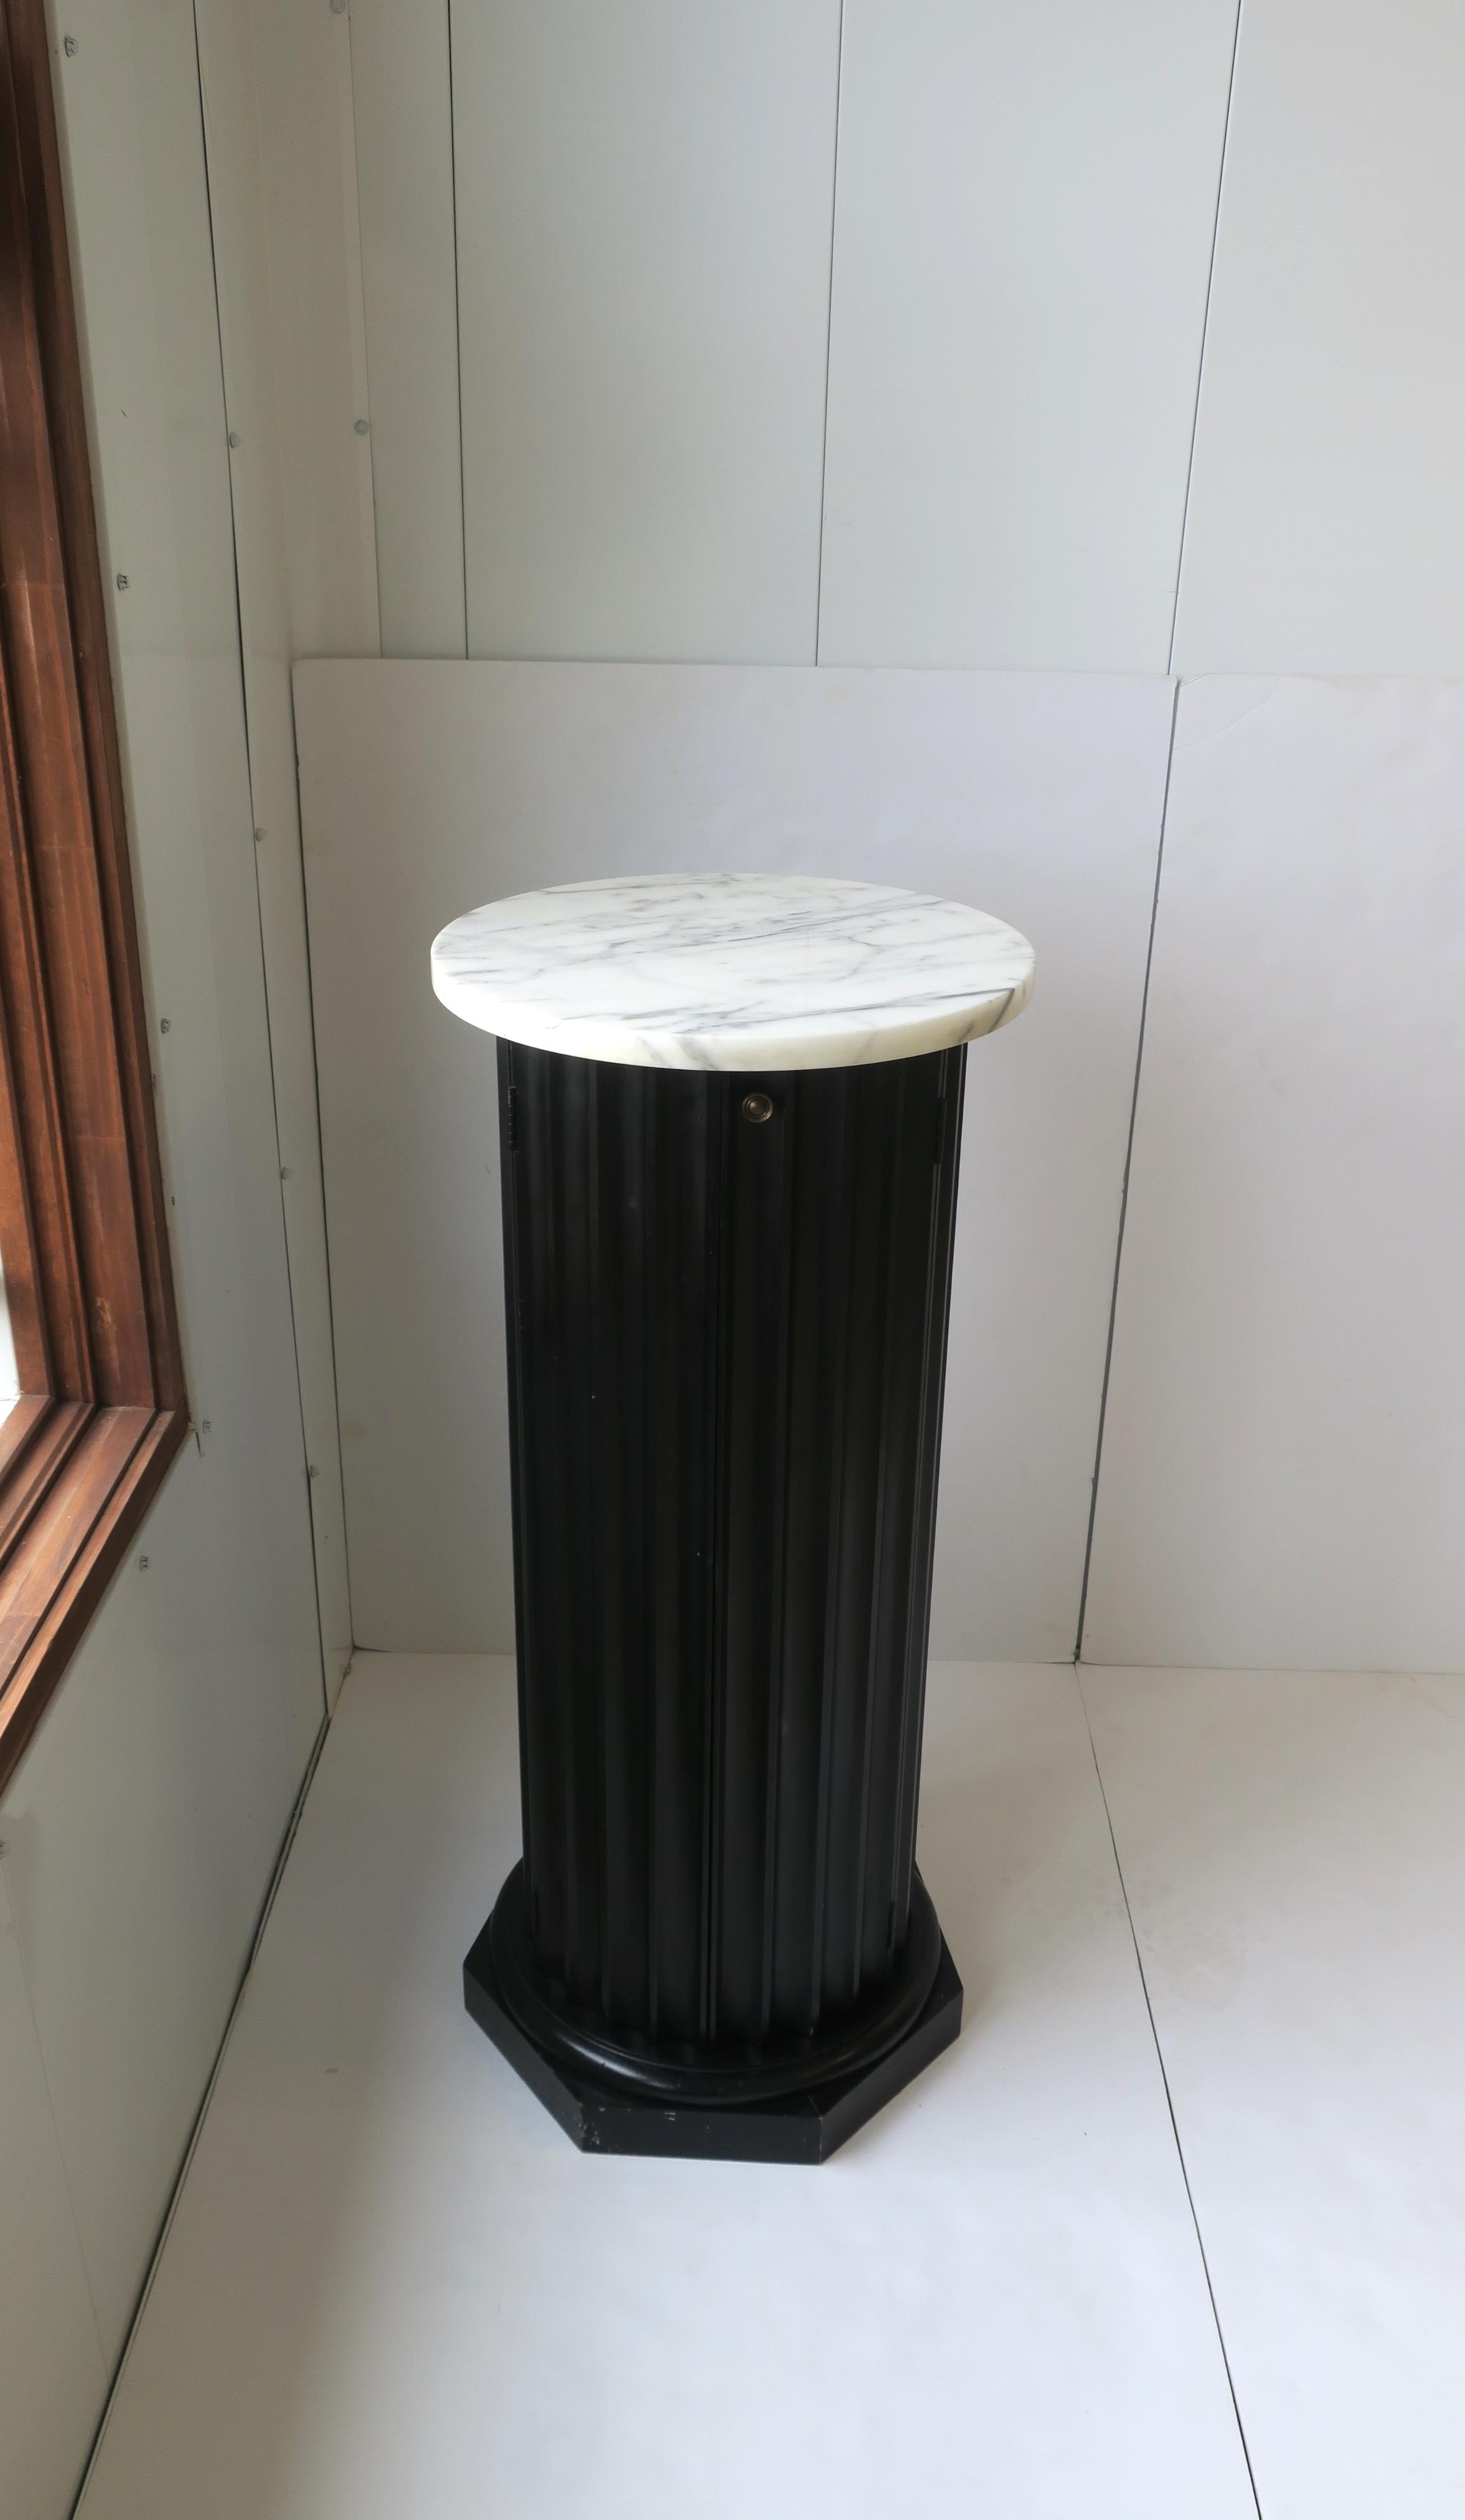 **Two available, each sold separately, as per listing

A beautiful black fluted wood and white marble top pillar column pedestal stand in the Neoclassical design style, circa mid to late-20th century. Fluted wood pedestal is black with a white